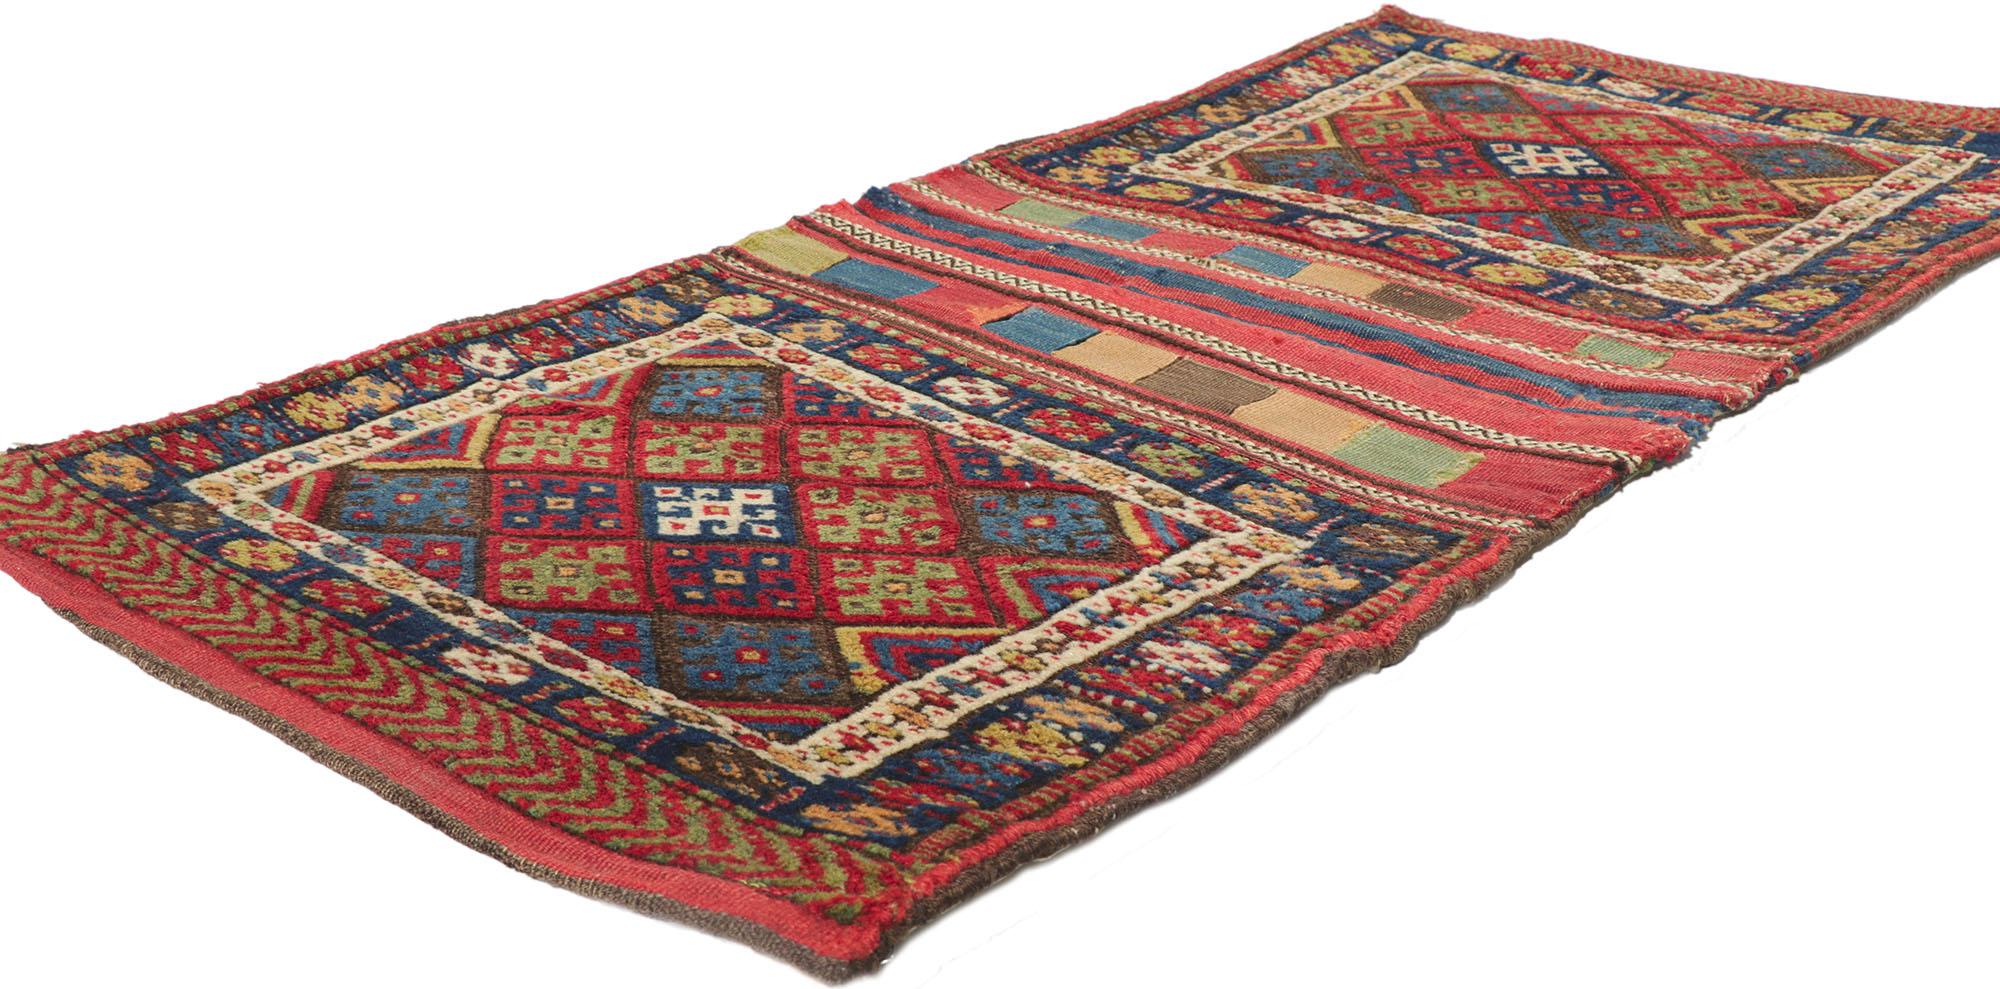 ?78192 Antique Kurdish Jaf Saddle Bag with Tribal Style 02'03 x 04'09. 
Warm and inviting with nomadic charm, this hand-knotted wool antique Kurdish Jaf saddle bag is a captivating vision of woven beauty. It features an all-over geometric pattern